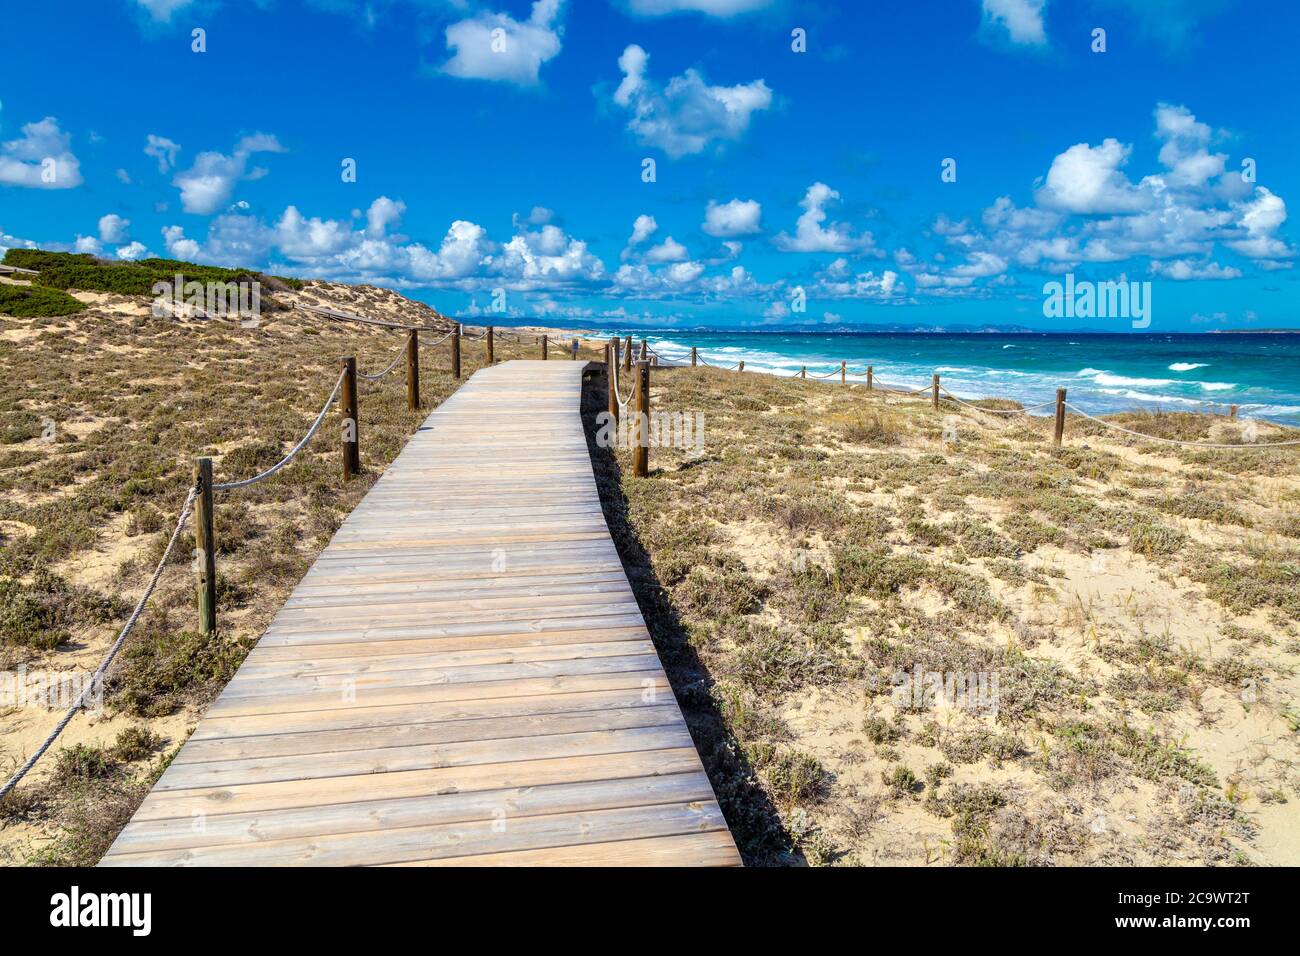 Wooden raised walkway over the protected sand dunes in Platja de Llevant, Formentera, Spain Stock Photo